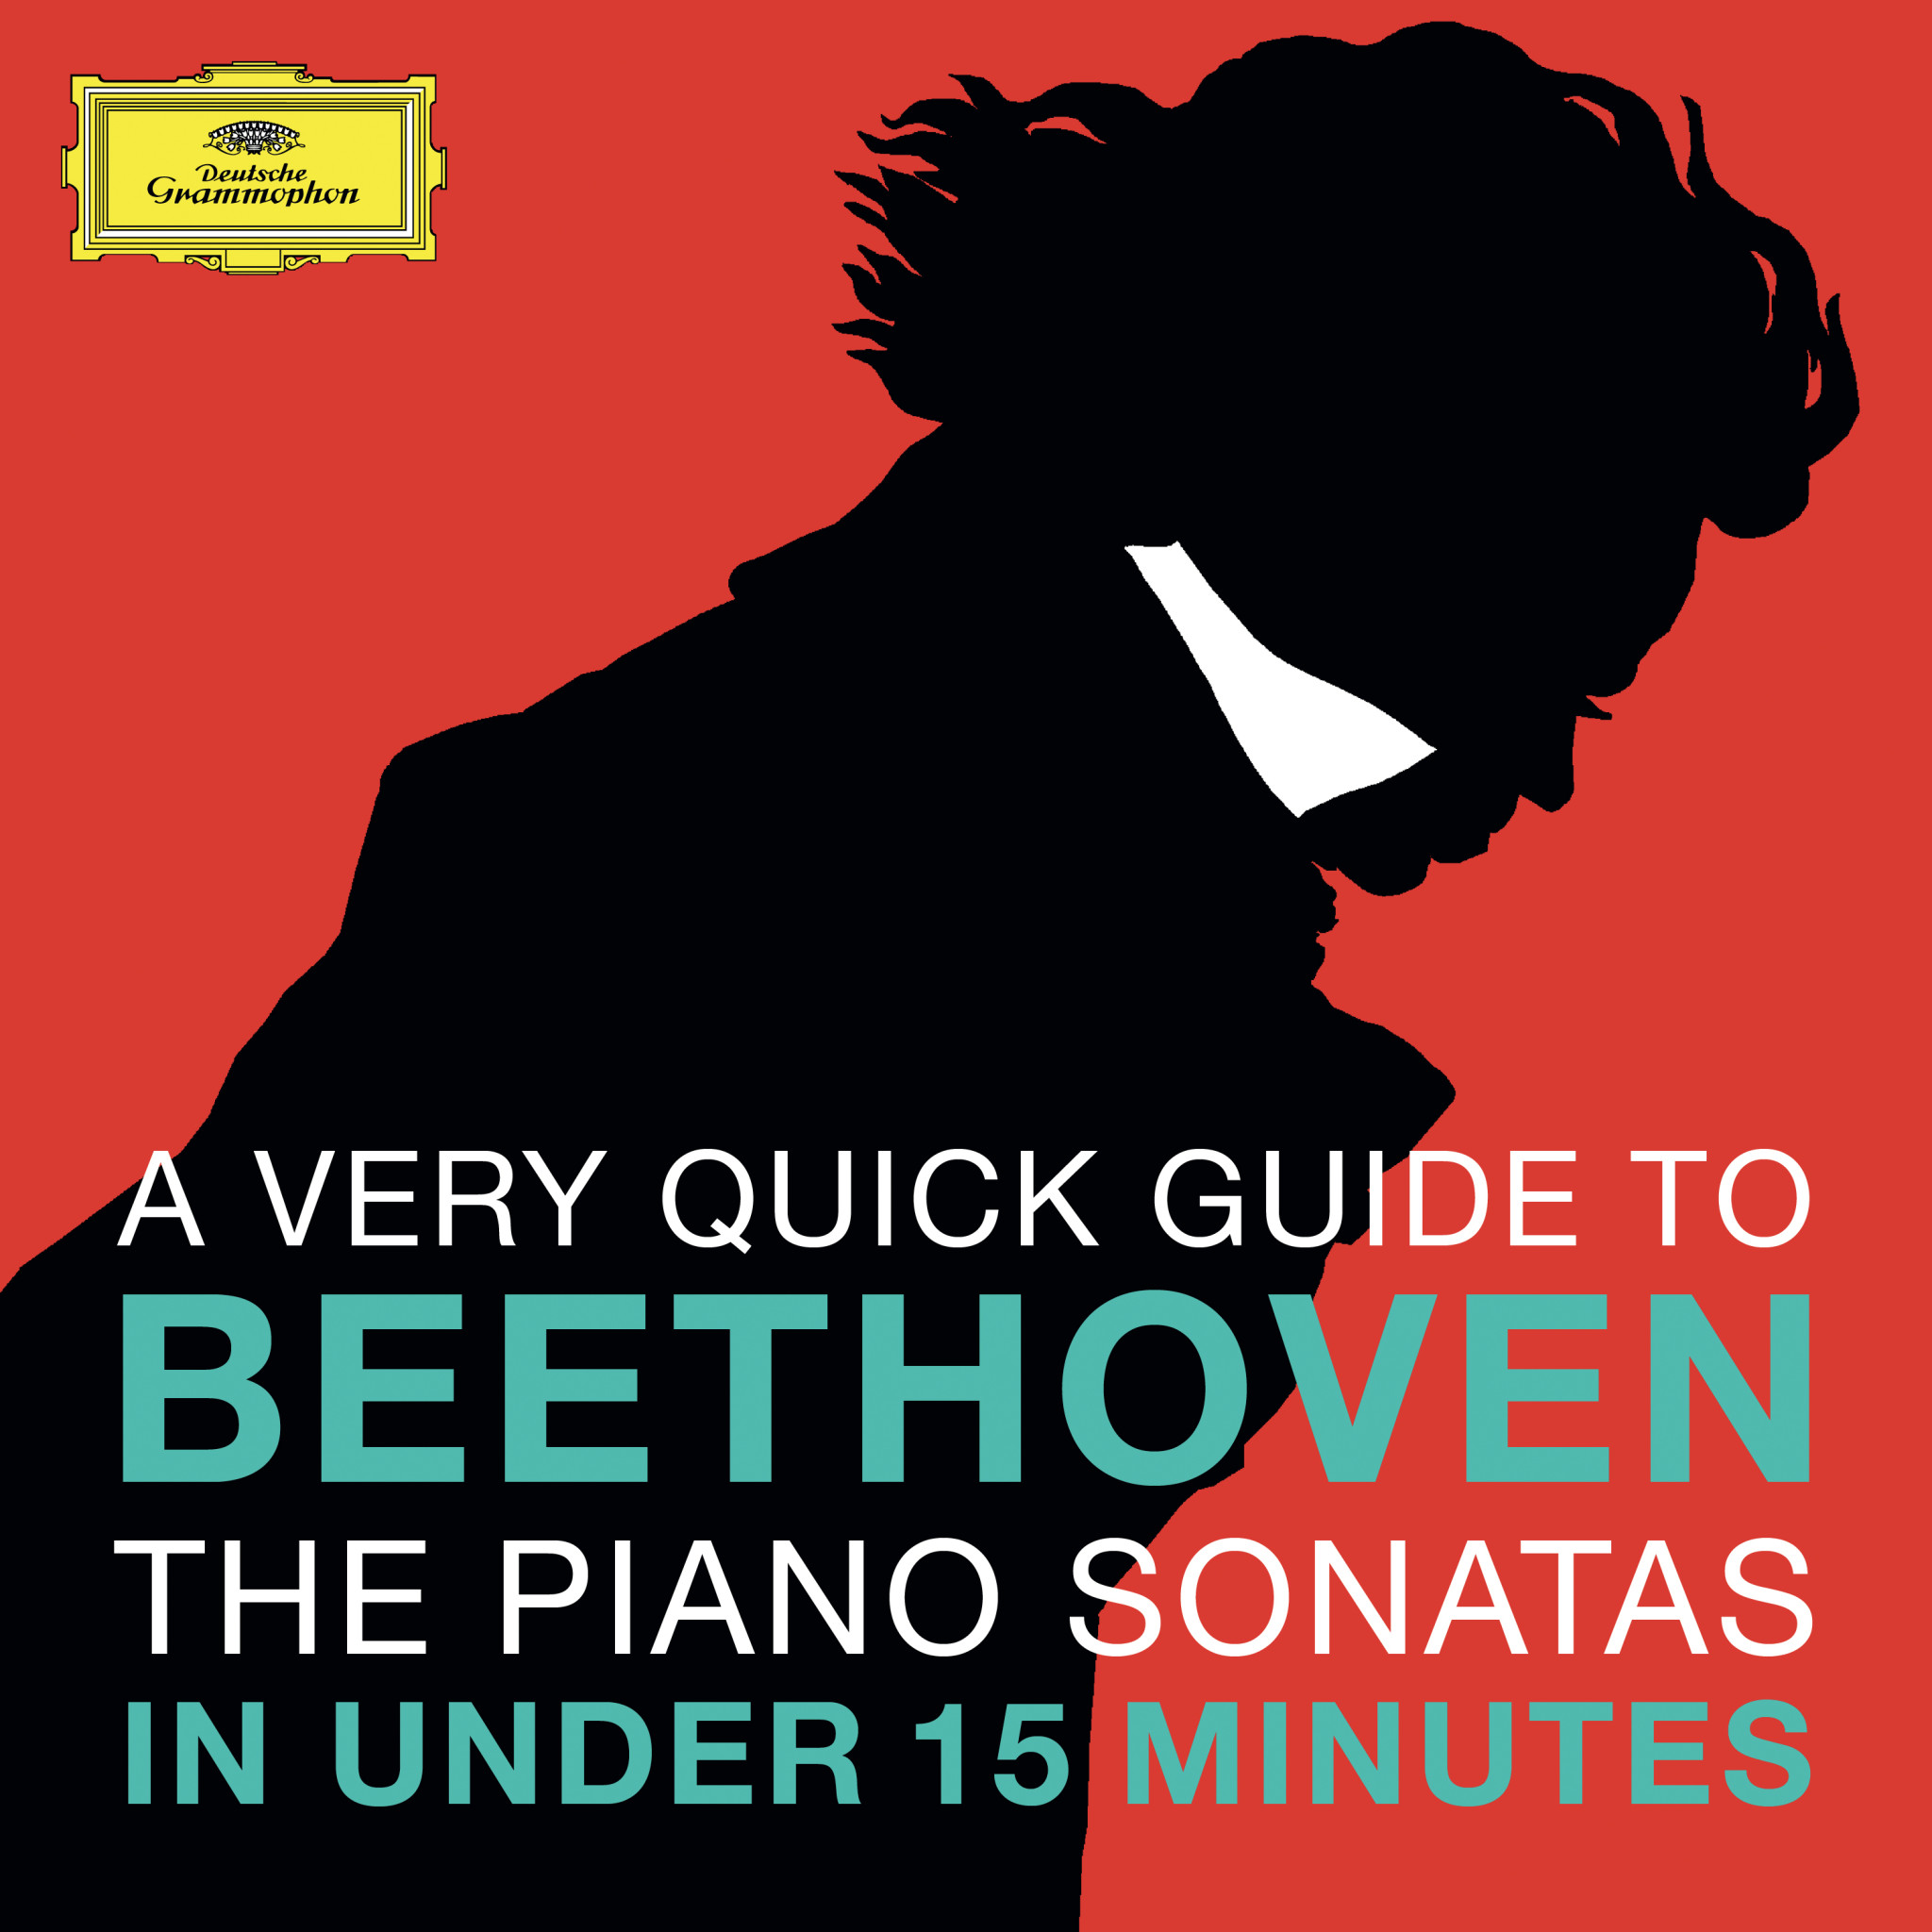 A very quick guide to Beethoven - The Piano Sonatas in under 15 minutes